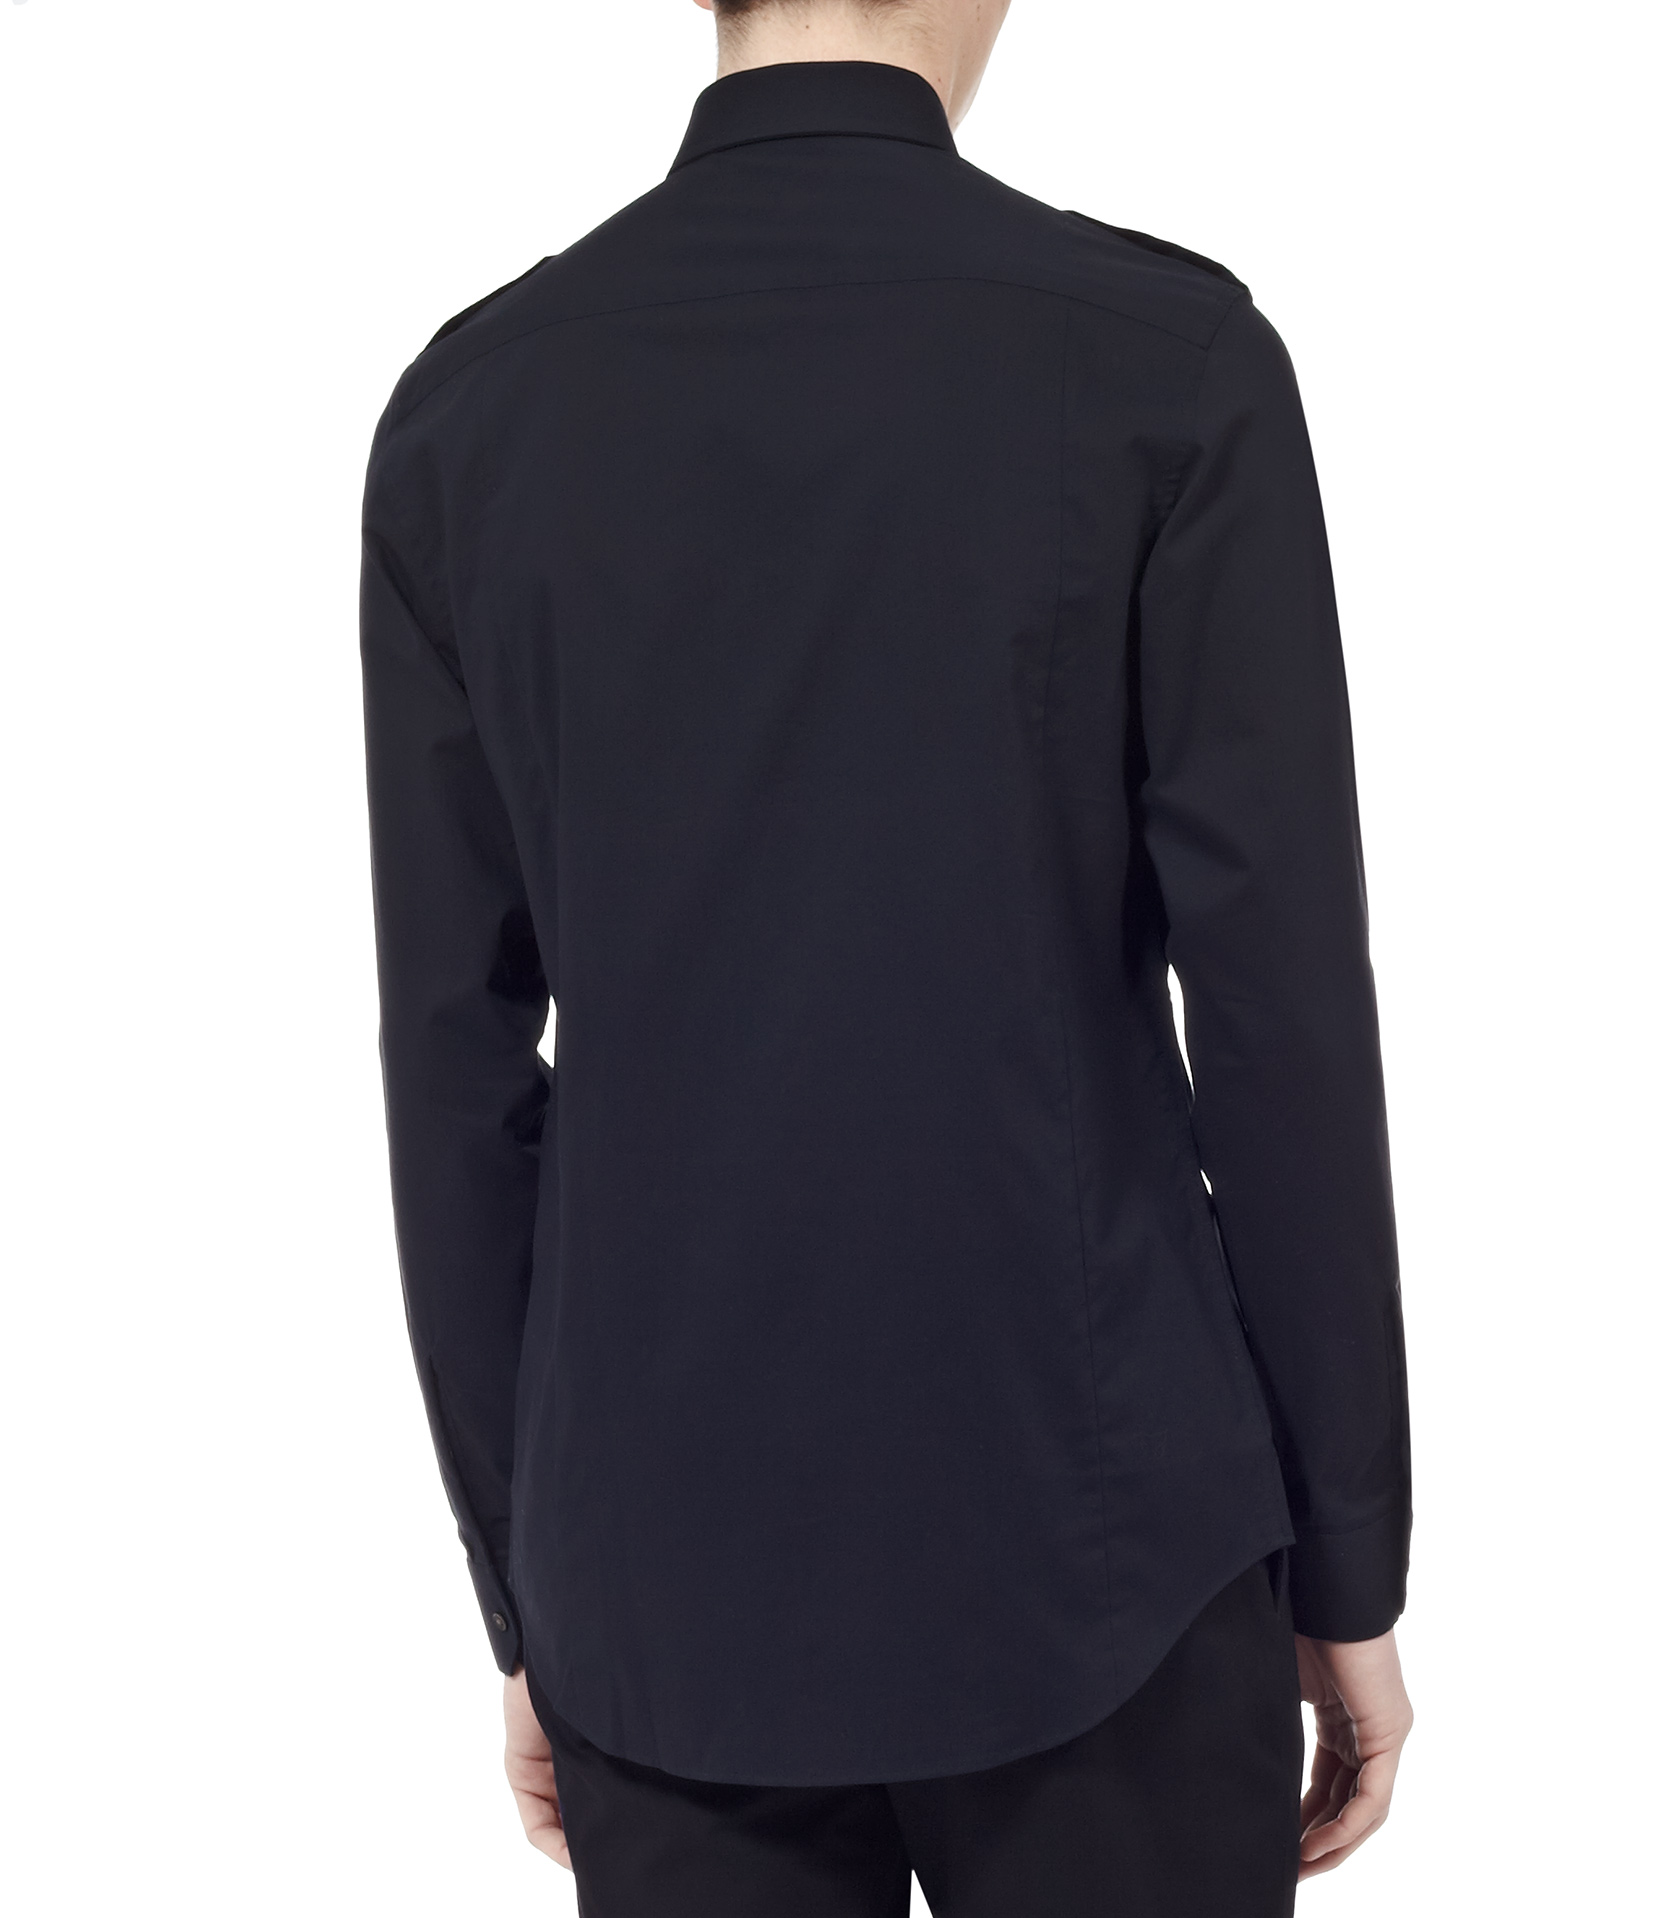 Reiss Napolean Military with Epaulette Shirt in Navy (Blue) for Men - Lyst